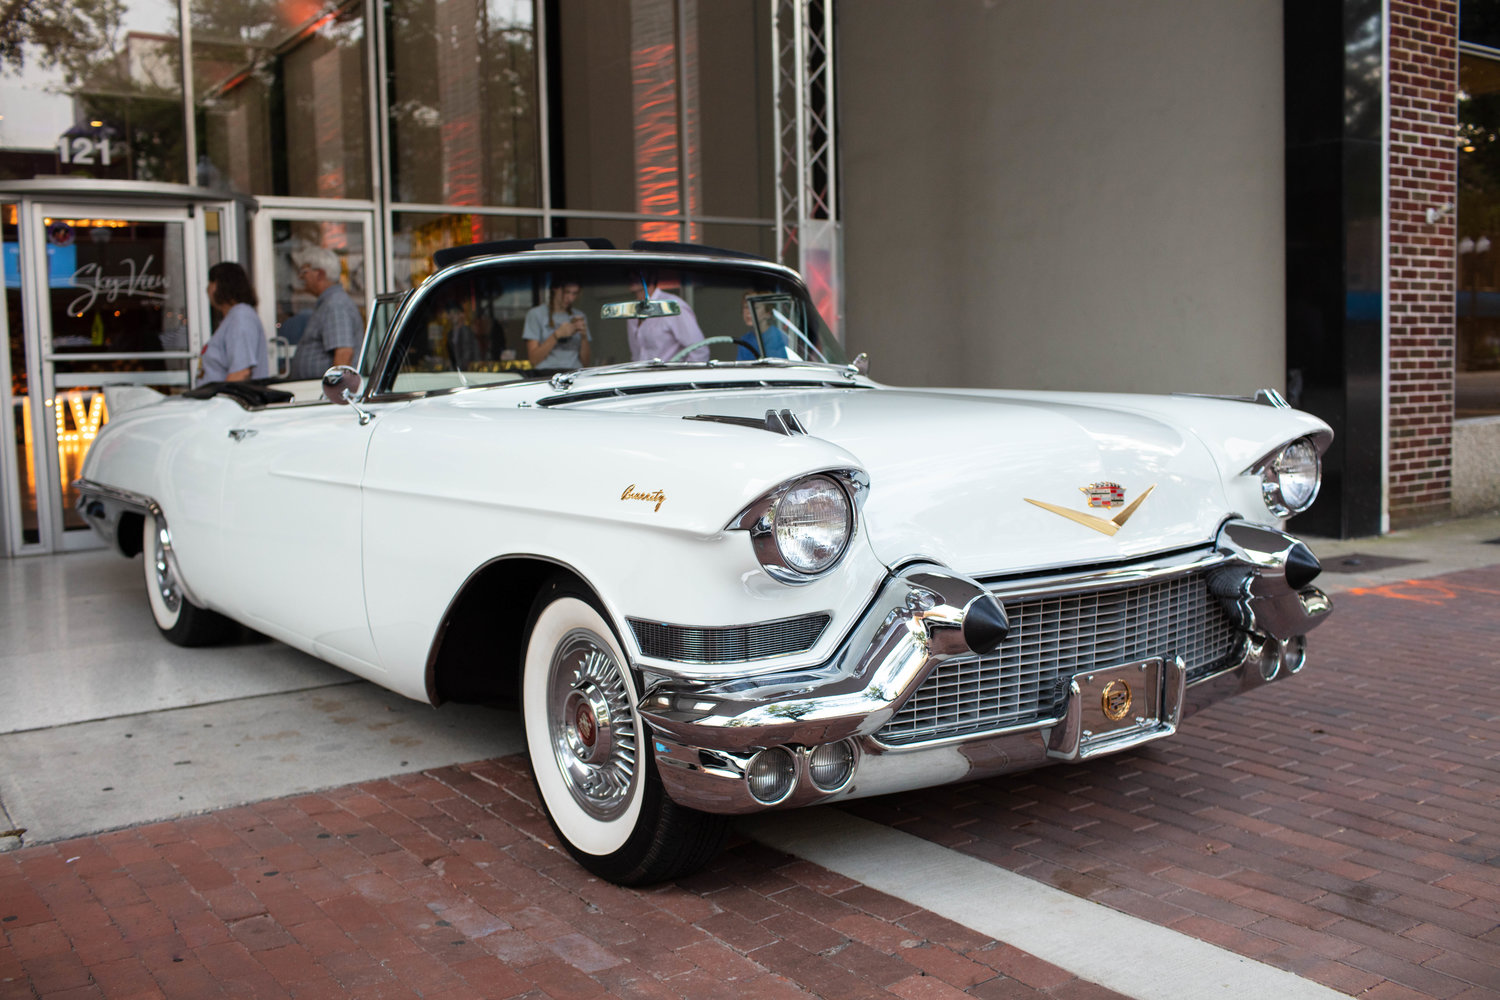 A 1957 Cadillac El Dorado donated for the night by Danny Hall from ABC Plumbing Company.